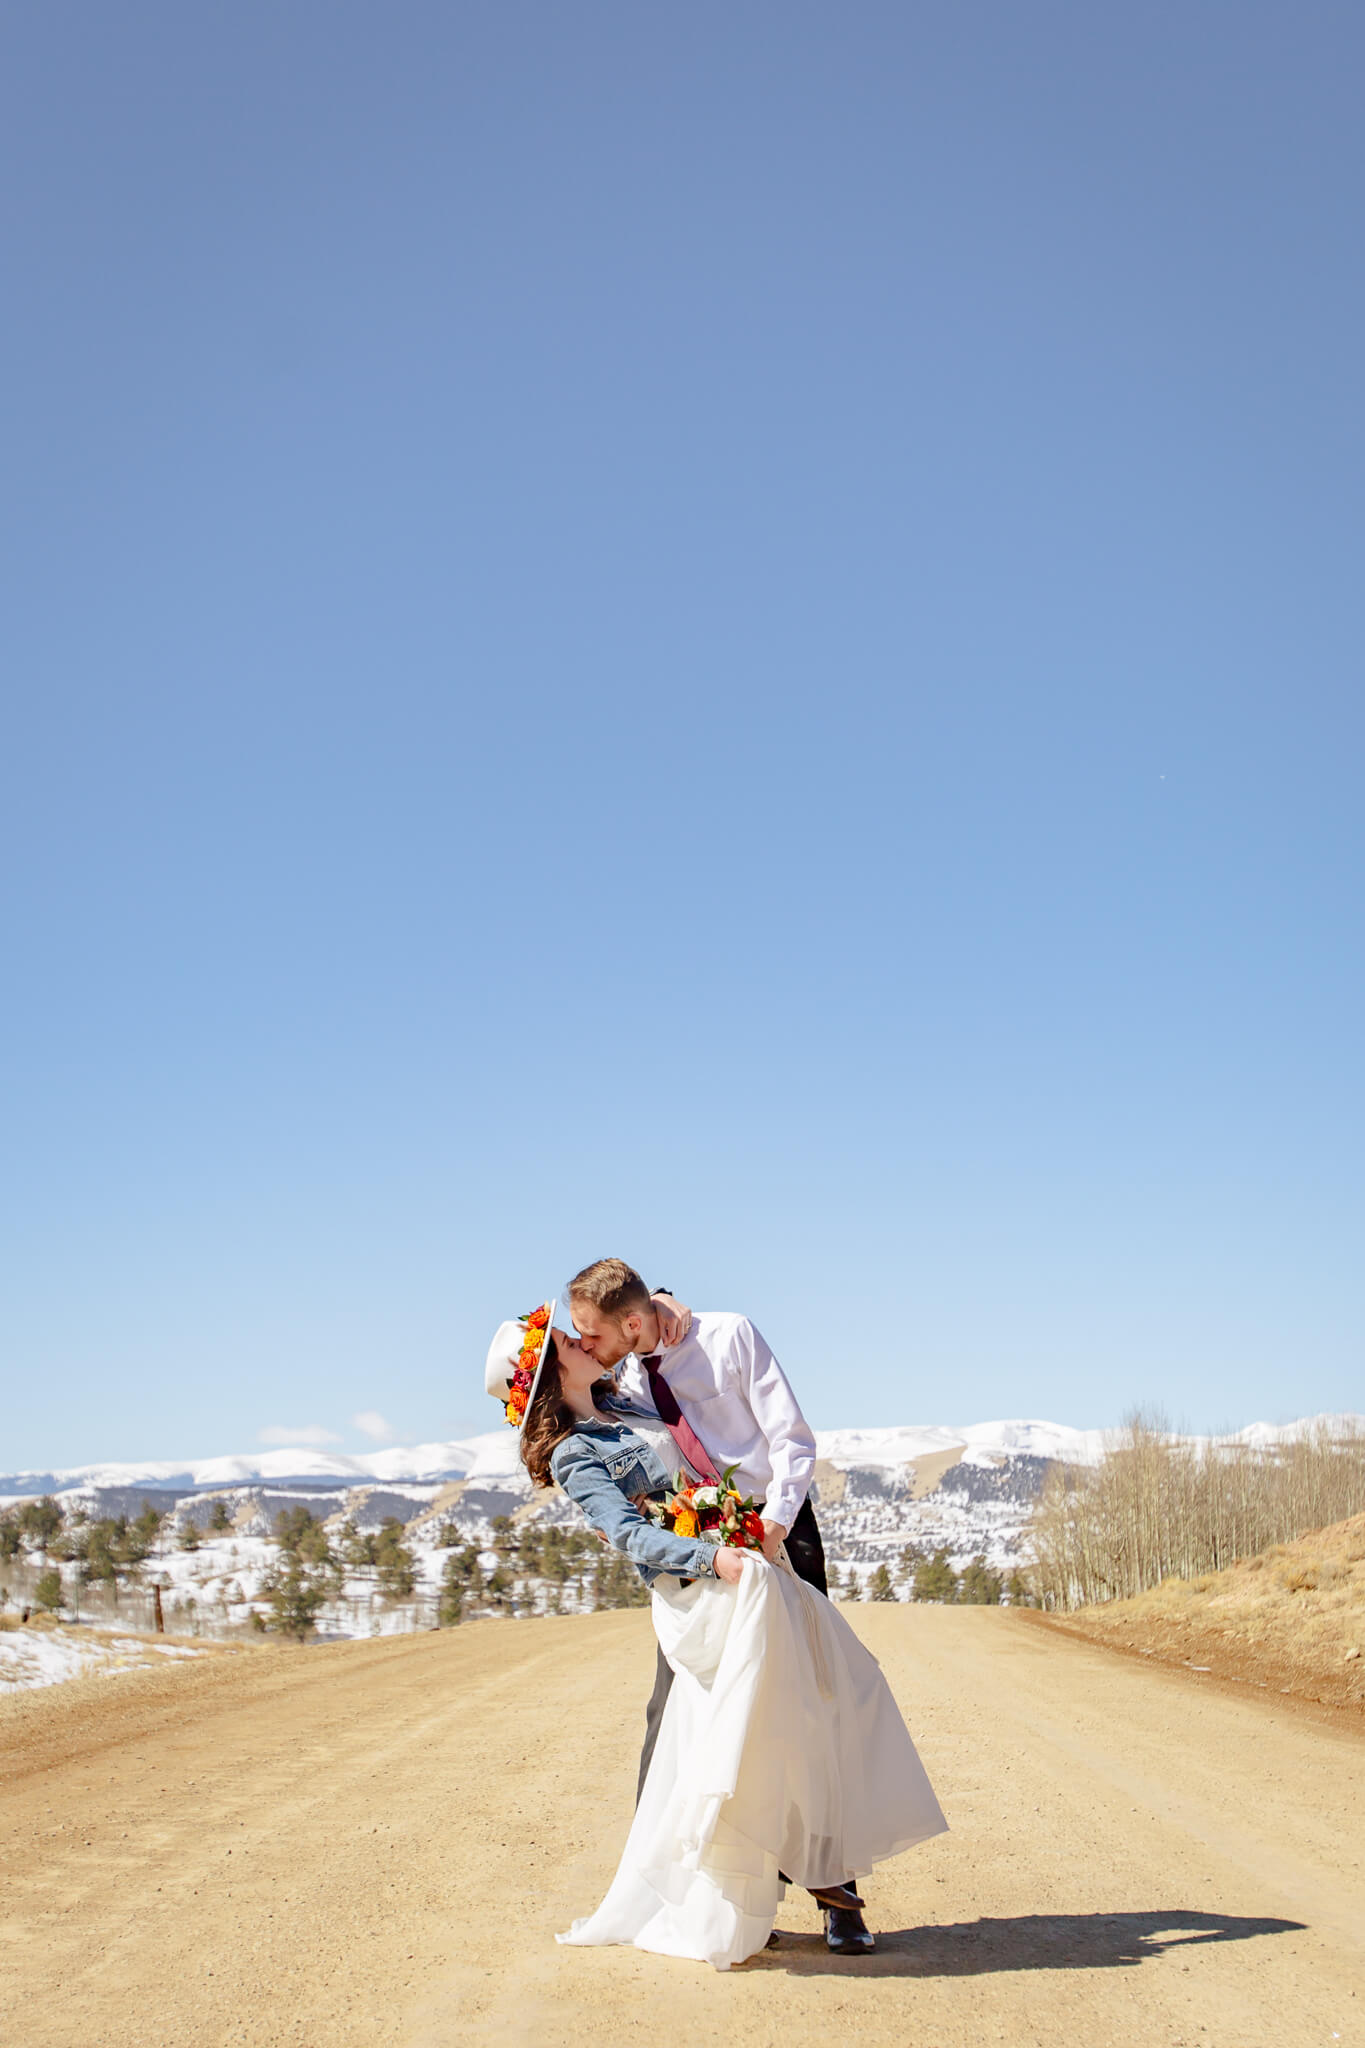 Couple kissing with the mountains in the background.